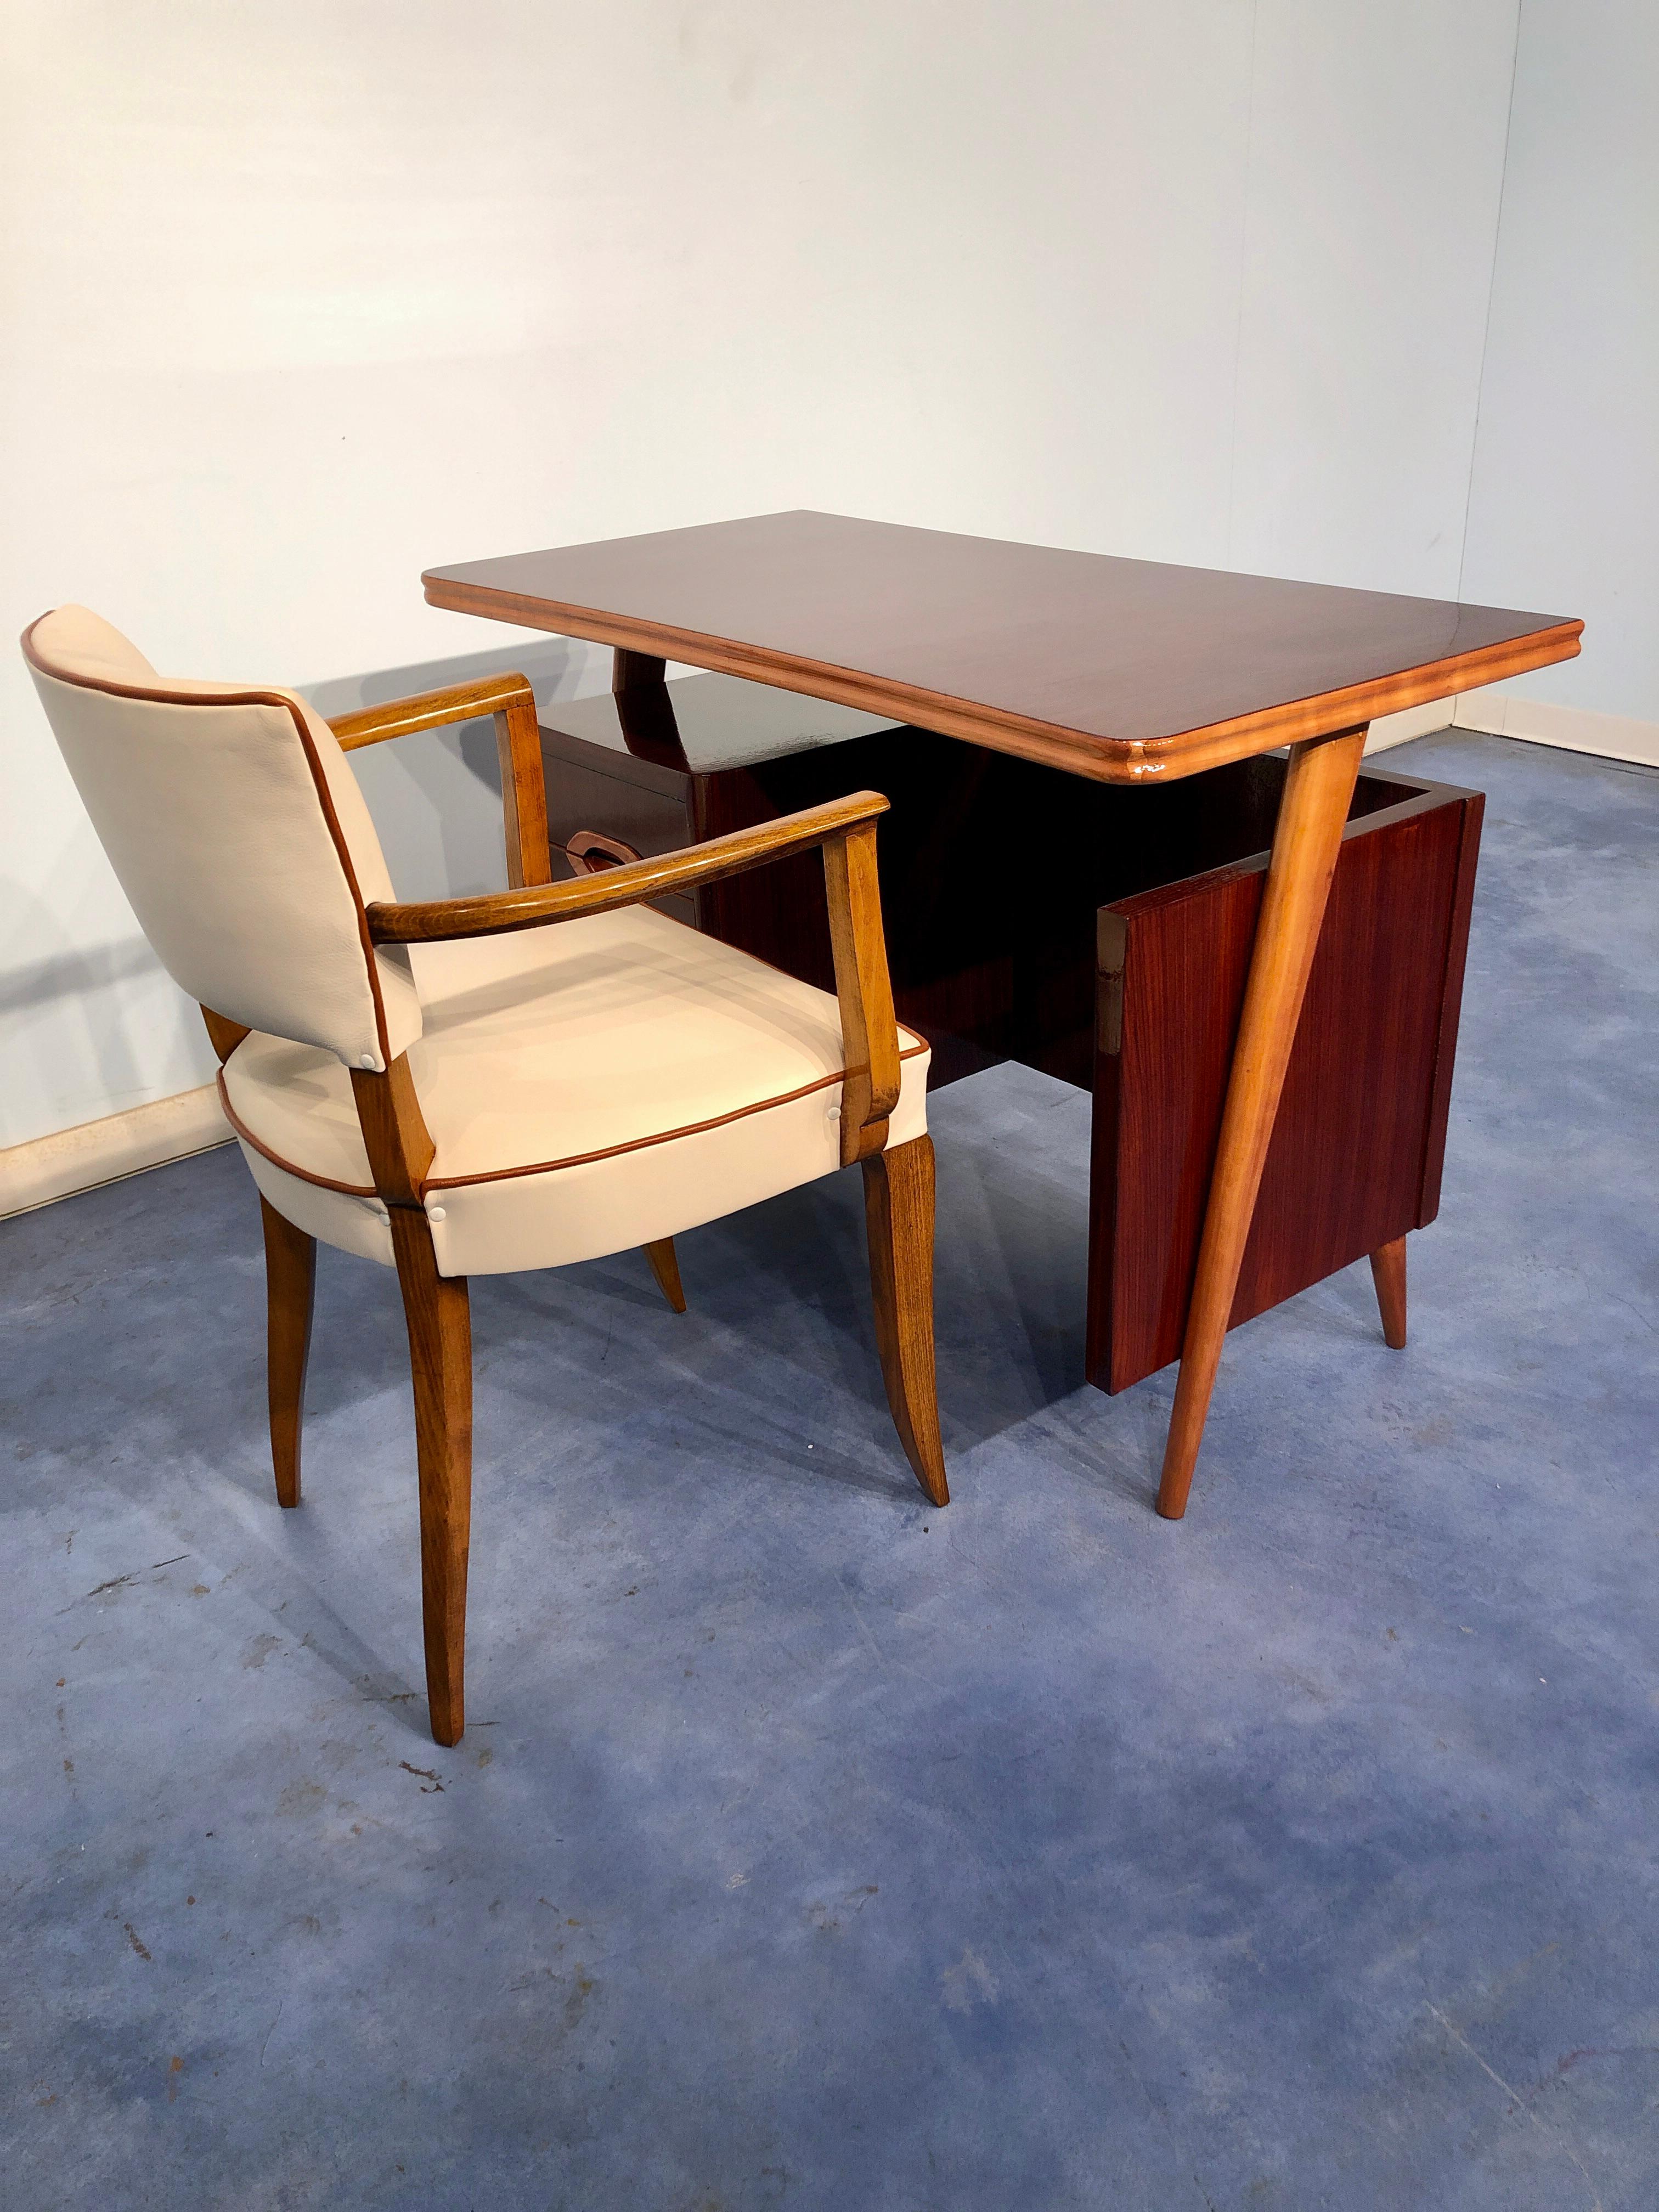 Beautiful Italian midcentury teak desk and chair designed by Vittorio Dassi.
Very nice and original the colour, that contrast is obtained by the designer in using rosewood and maple.
Four drawers with carved maple handles and stylish tapered